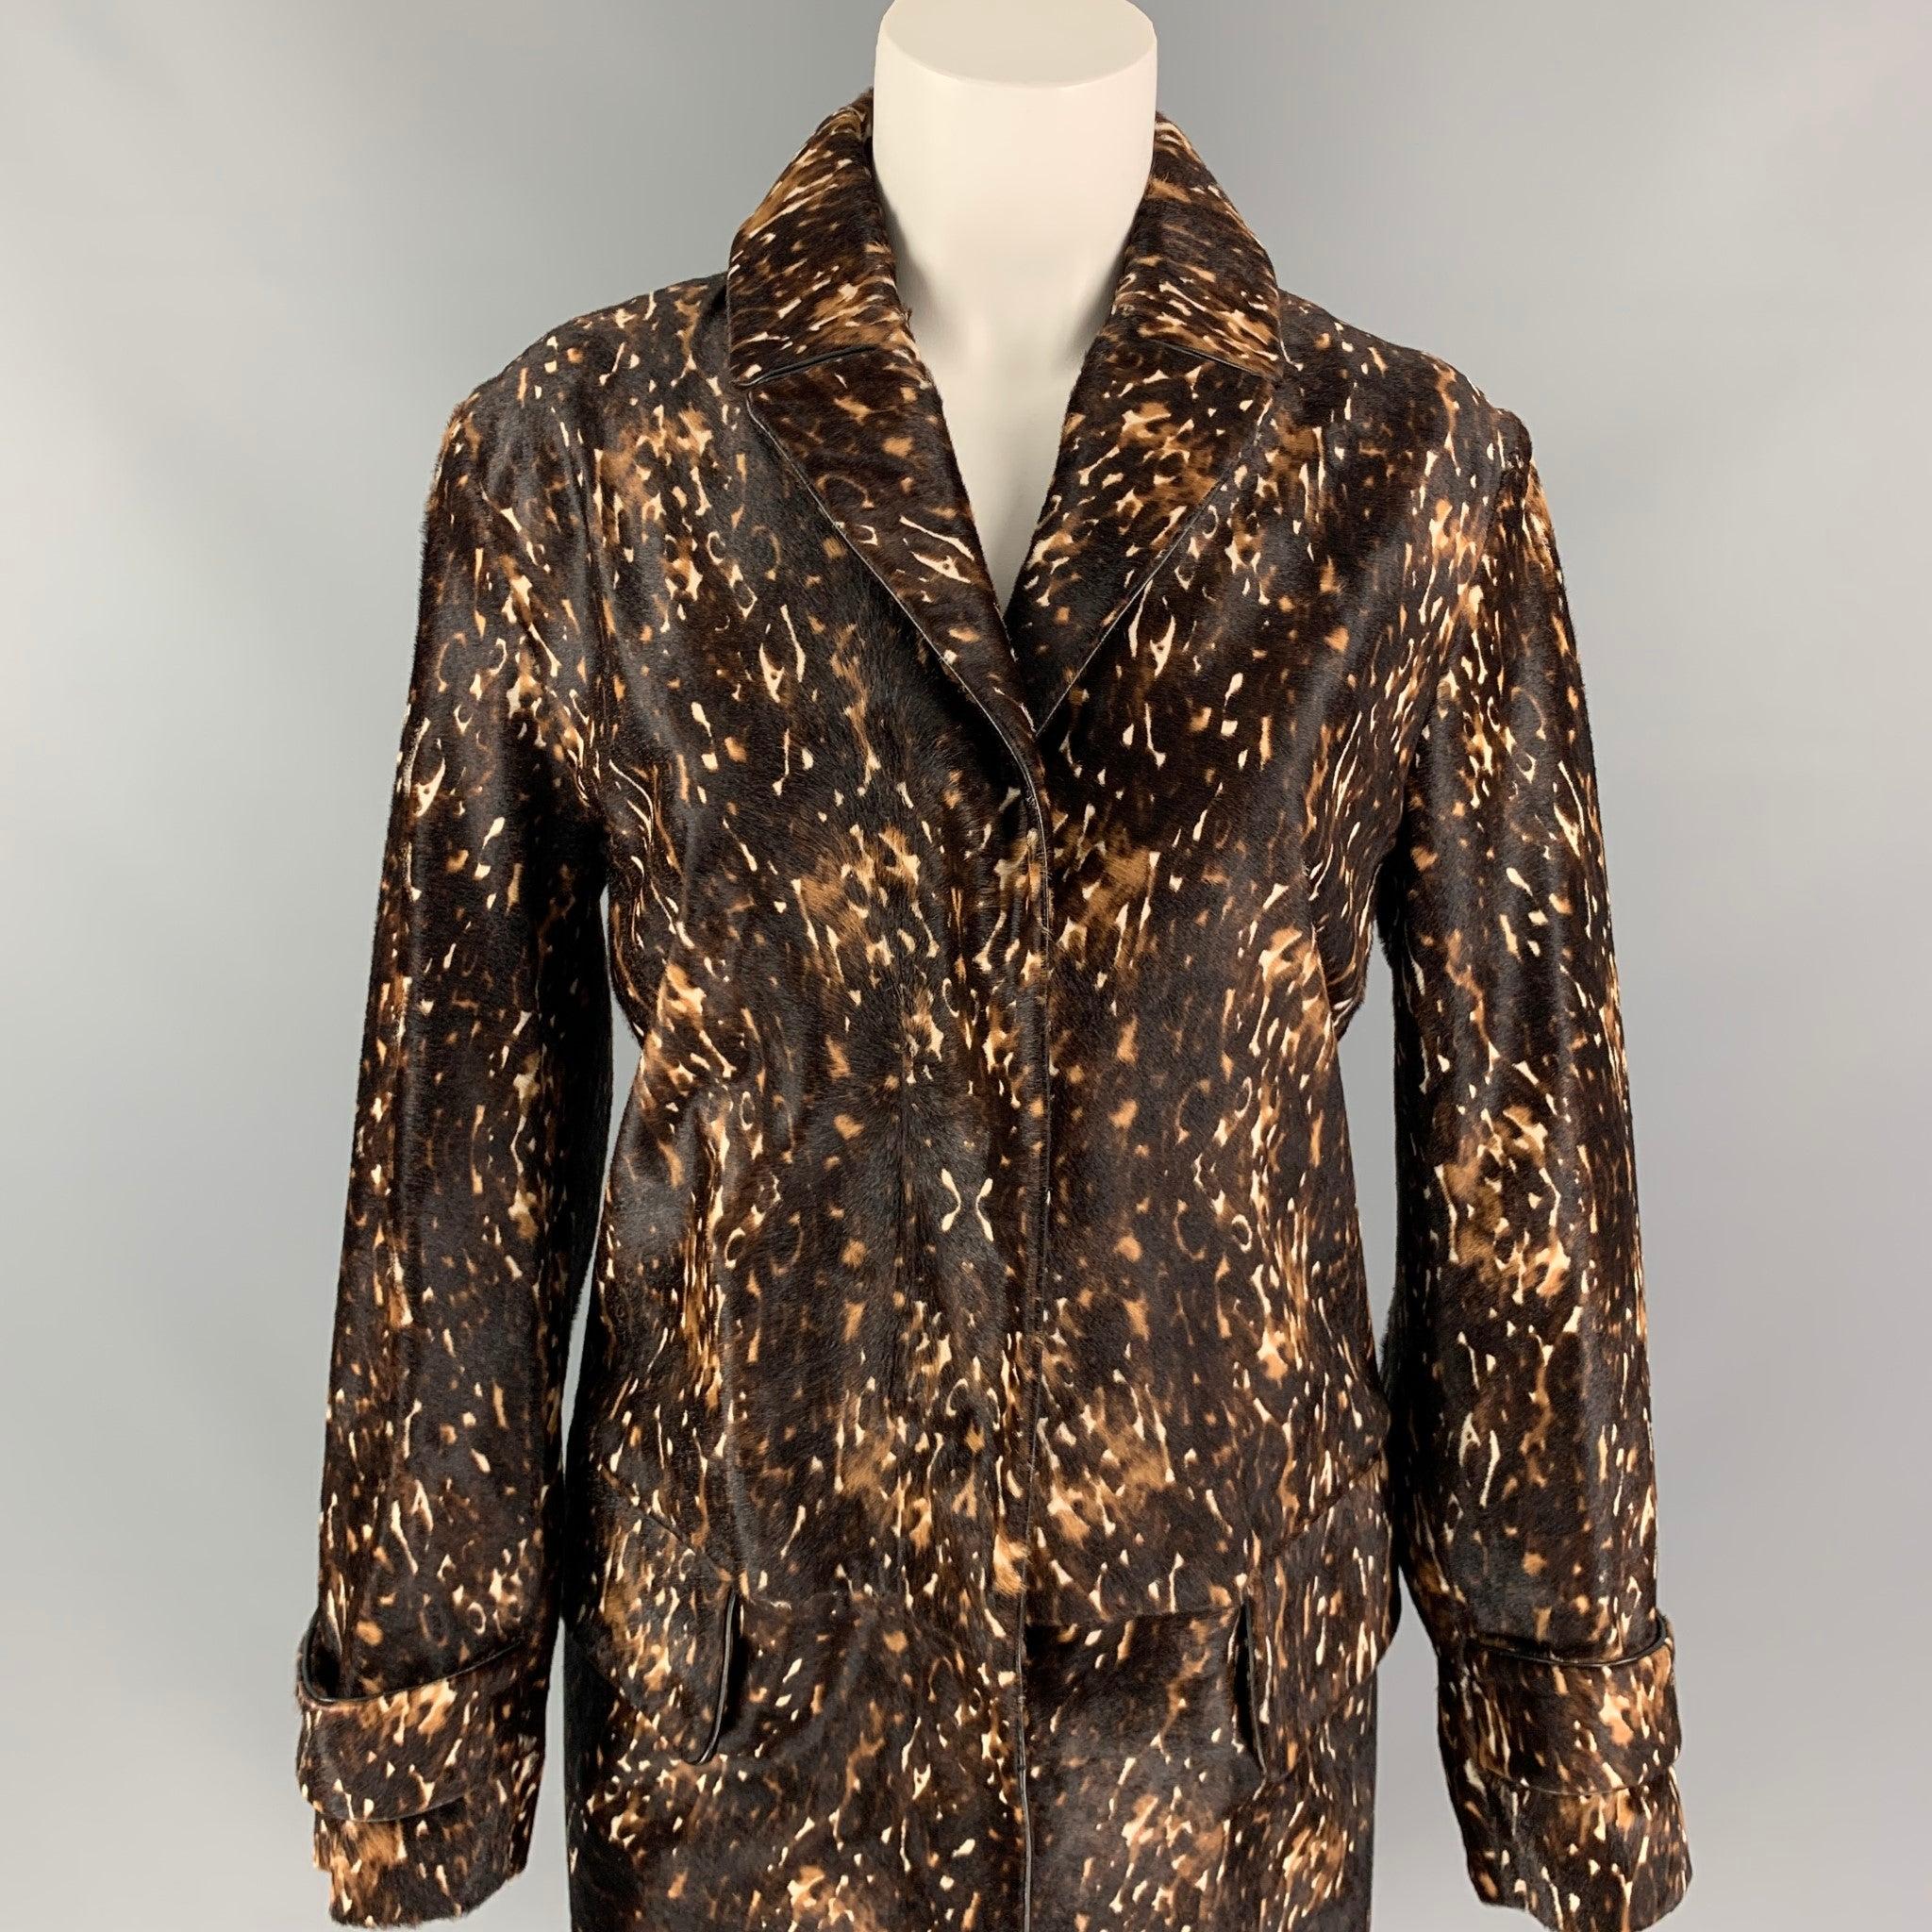 BURBERRY PRORSUM Pre-Fall 2013 Size 8 Brown & Tan Calf Hair Animal Print Coat In Excellent Condition For Sale In San Francisco, CA